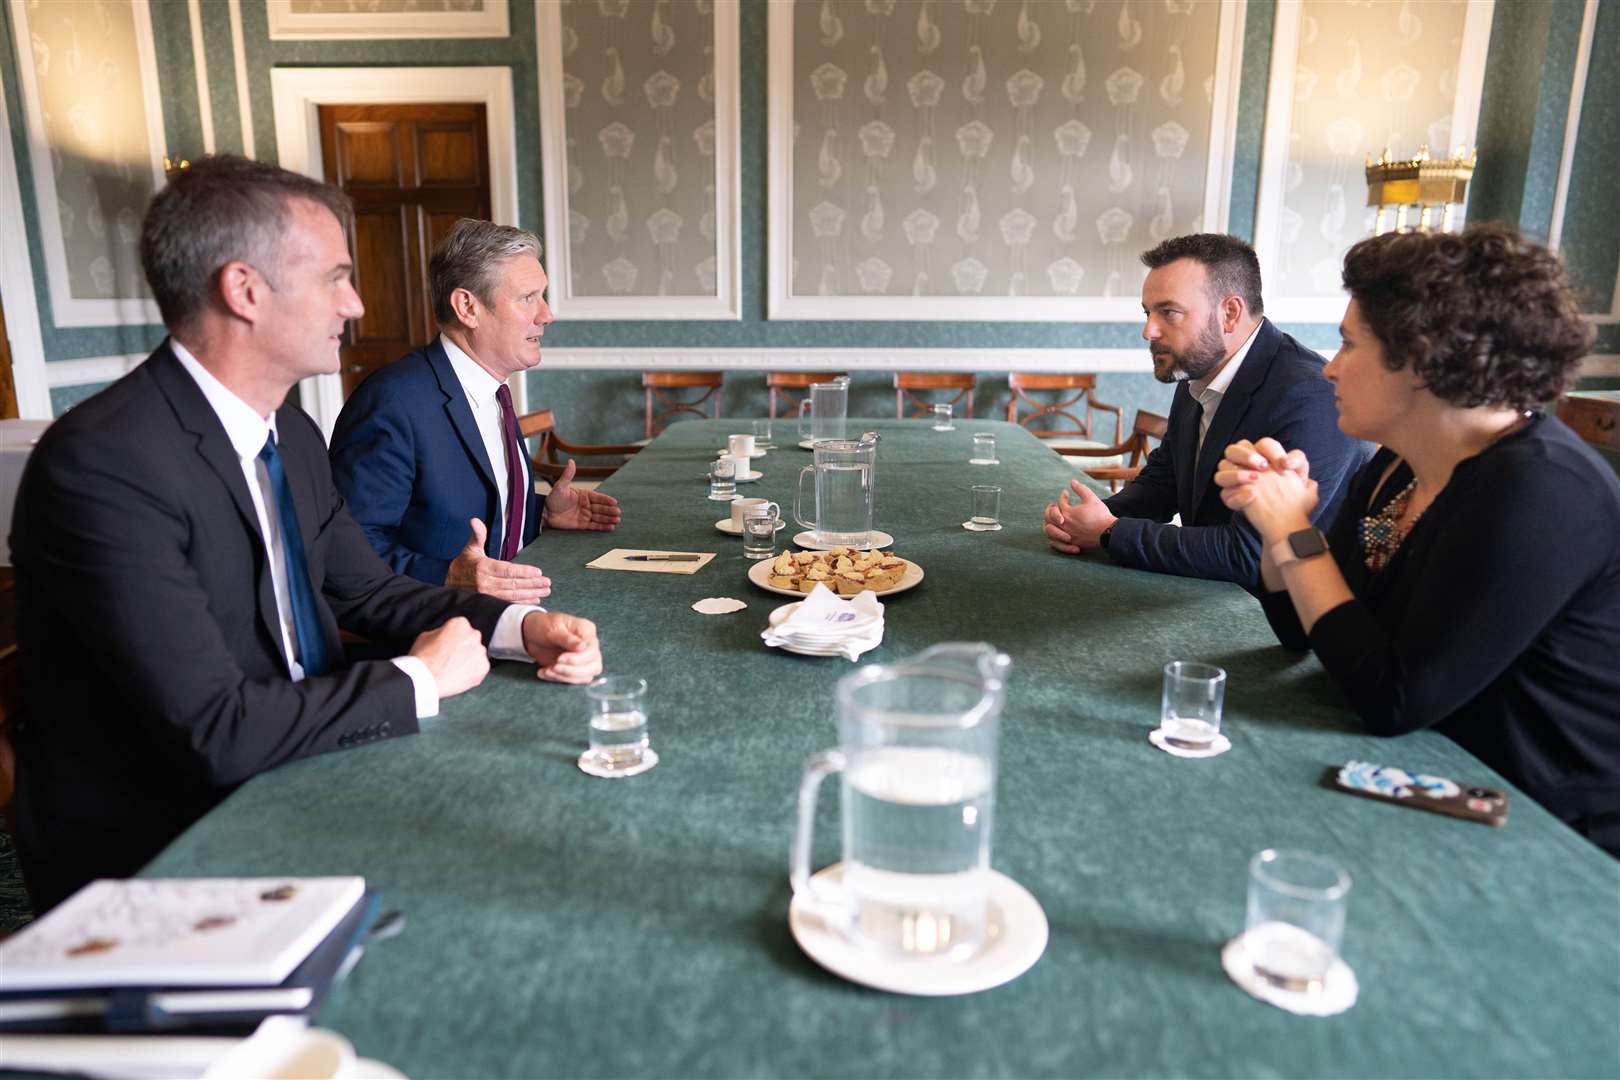 Sir Keir Starmer (second left) and Shadow Northern Ireland secretary, Peter Kyle (far left) meet Colum Eastwood and Claire Hanna of the SDLP (Stefan Rousseau/PA)